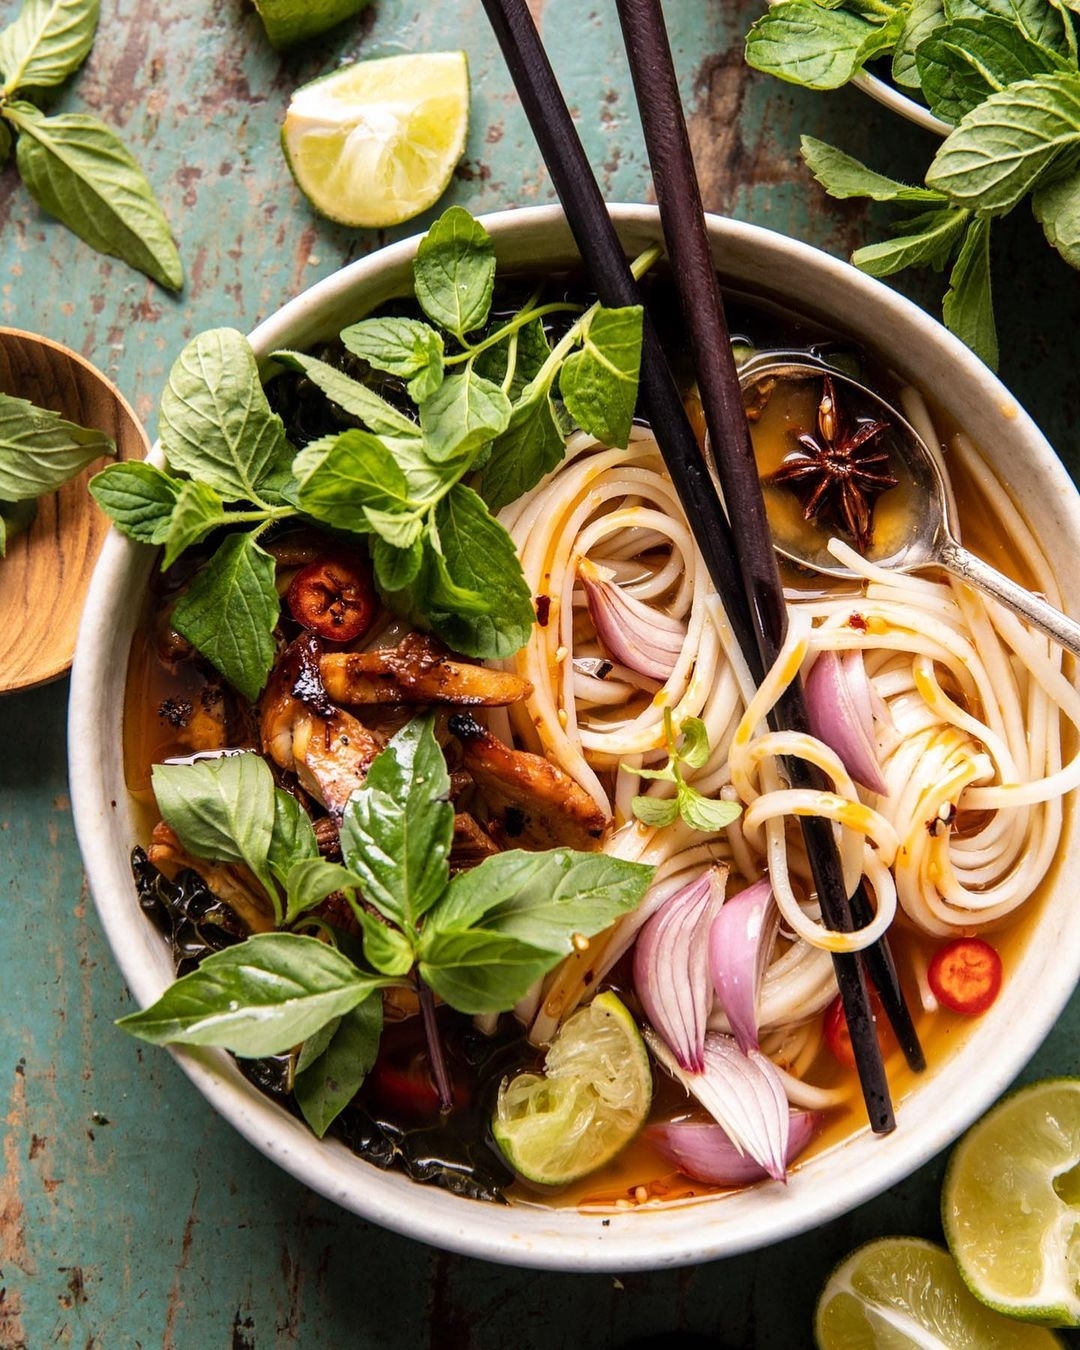 US food blogger criticized for misnaming noodle soup recipe ‘pho’